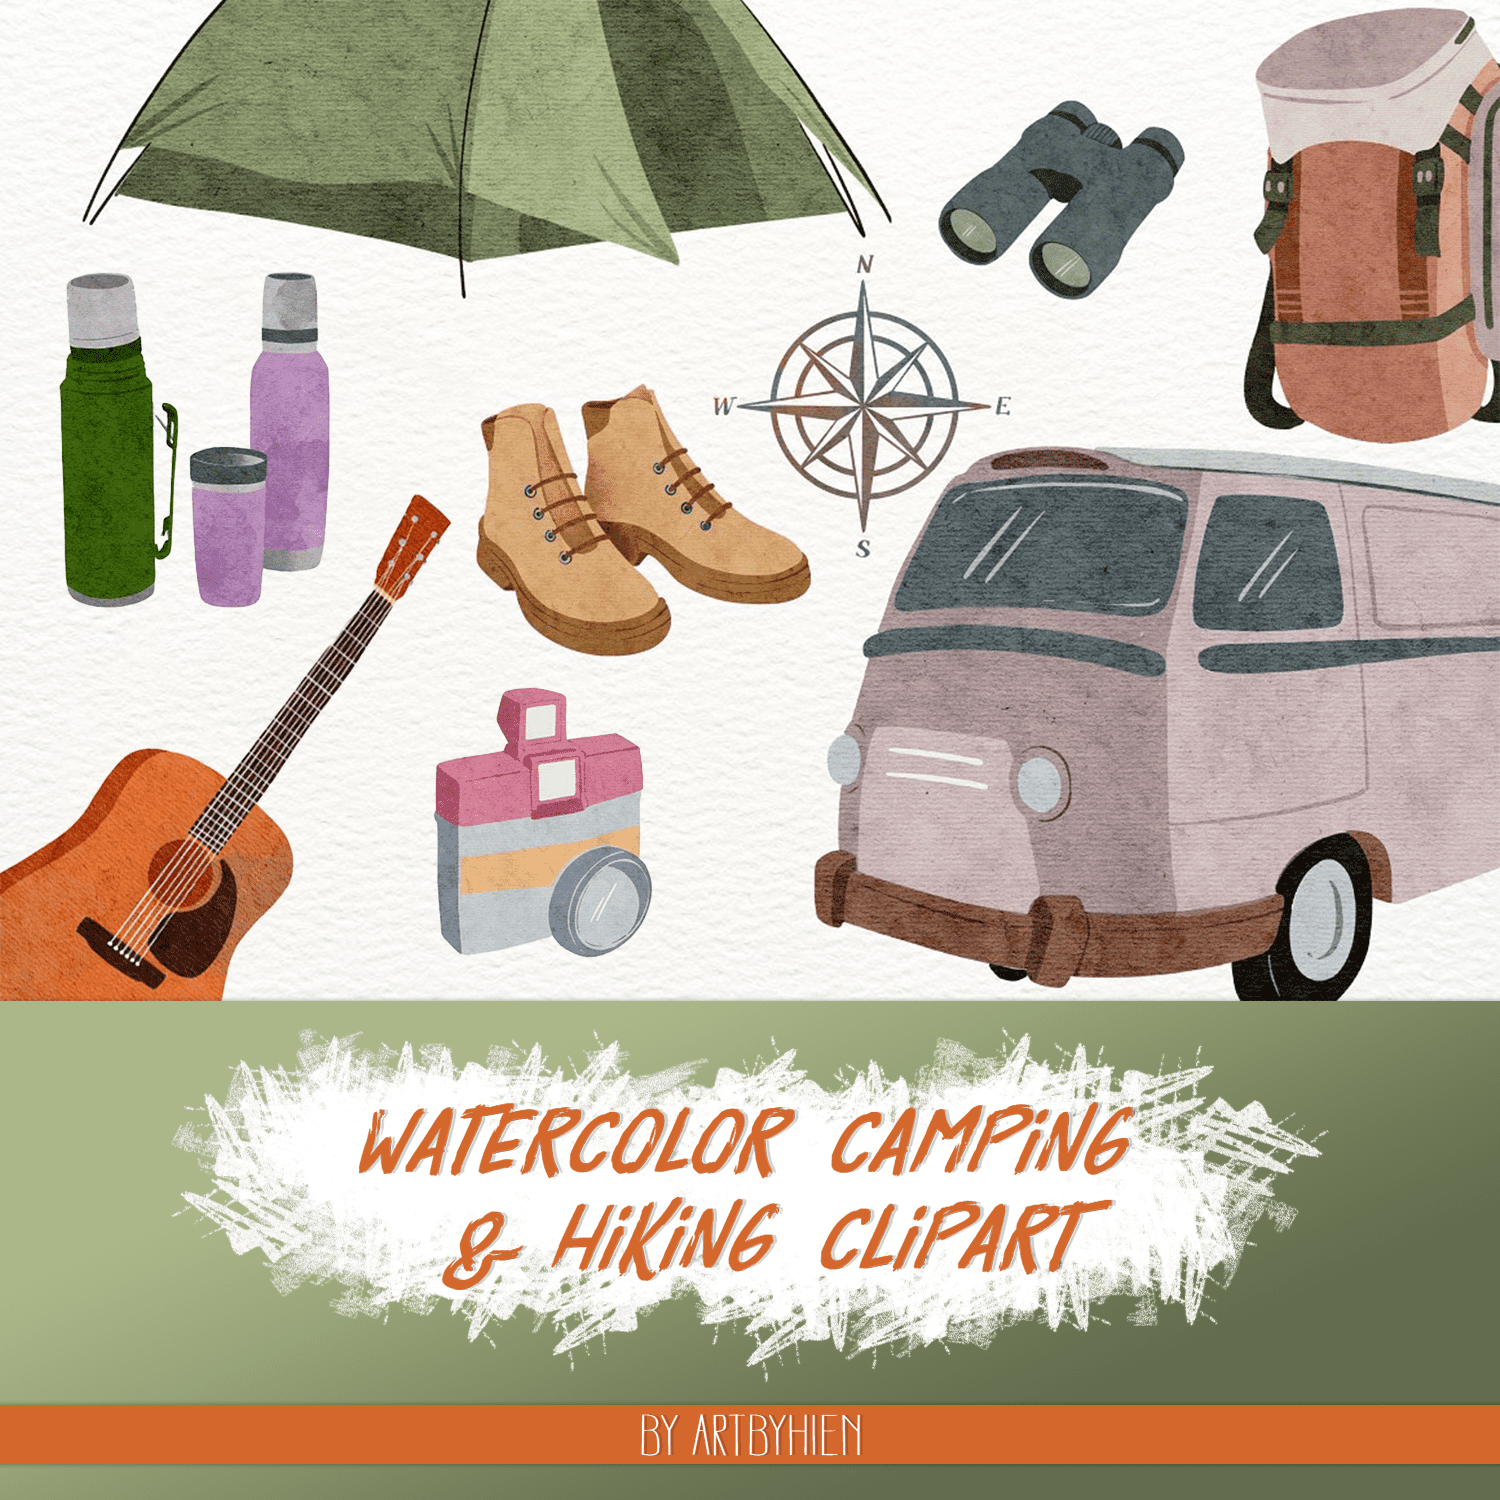 Watercolor camping hiking clipart - main image preview.